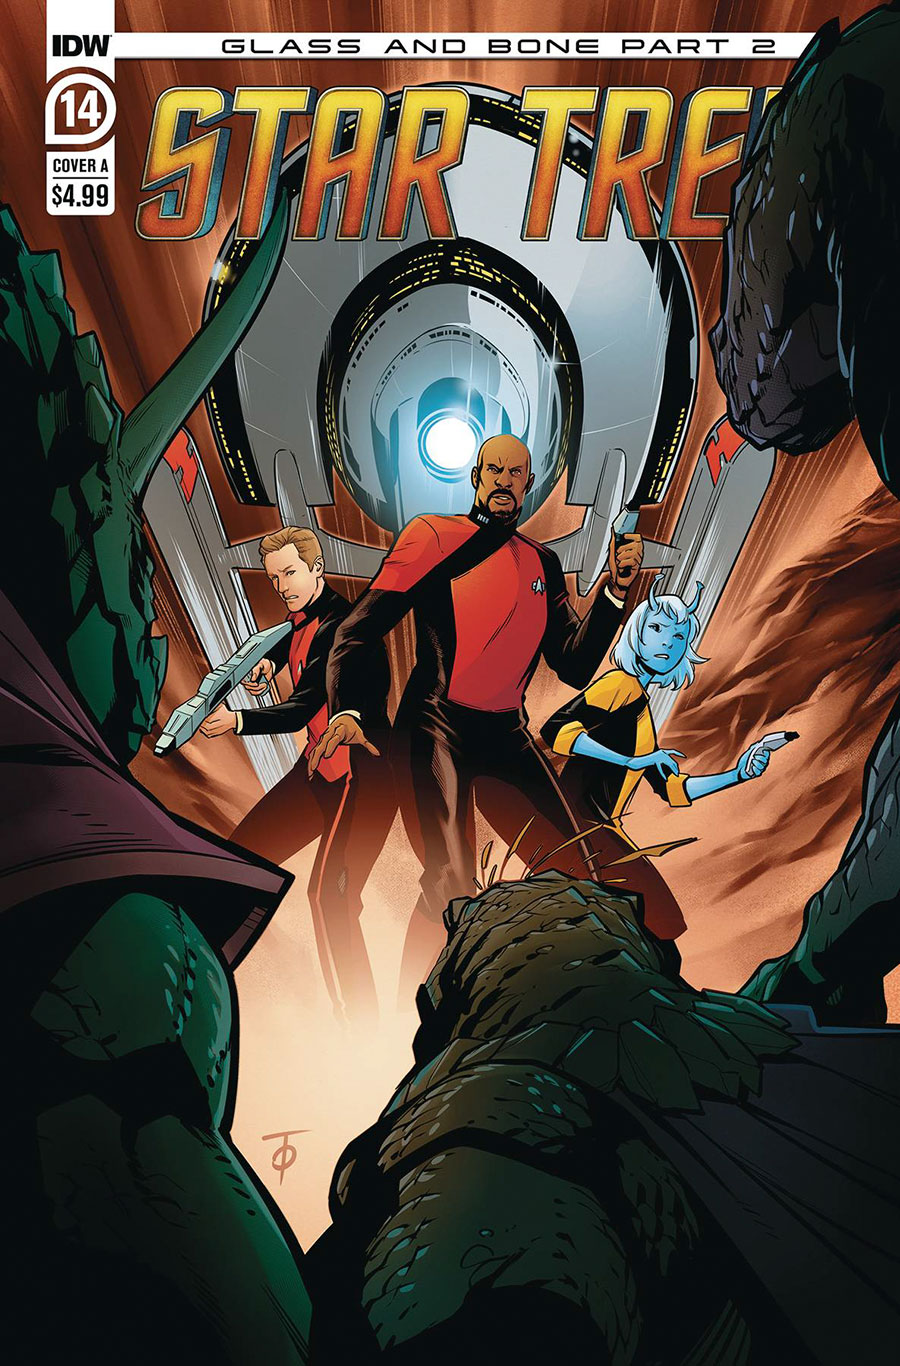 Star Trek (IDW) Vol 2 #14 Cover A Regular Marcus To Cover